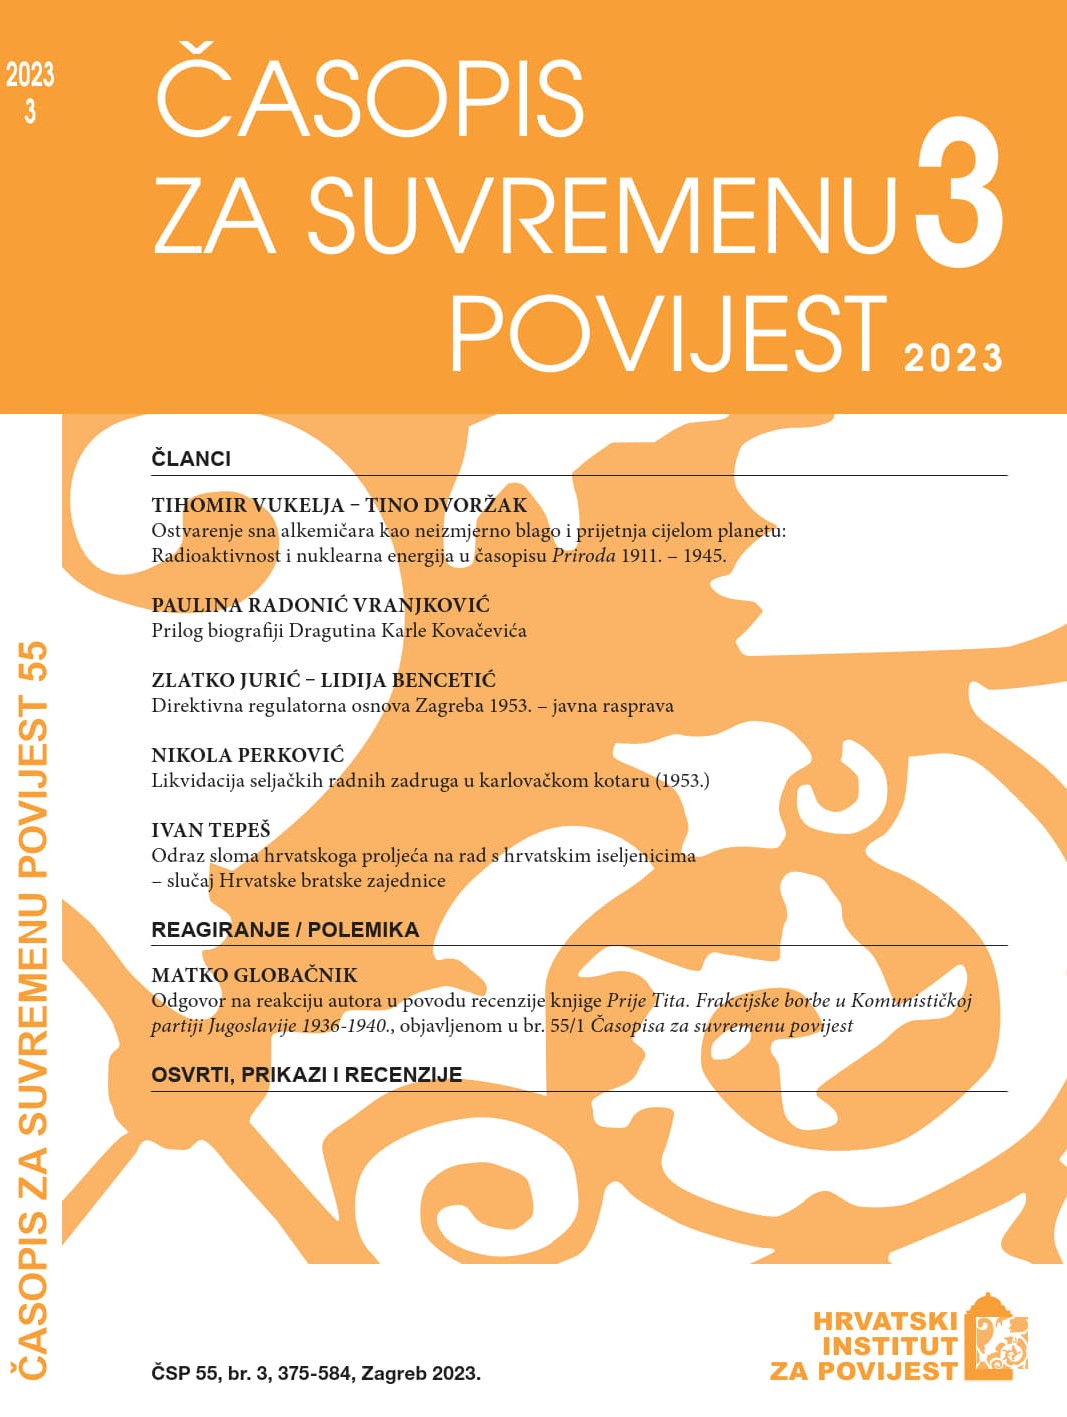 The Impact of the Croatian Spring on the Work with Croatian Emigrants – the Case of the Croatian Fraternal Union Cover Image